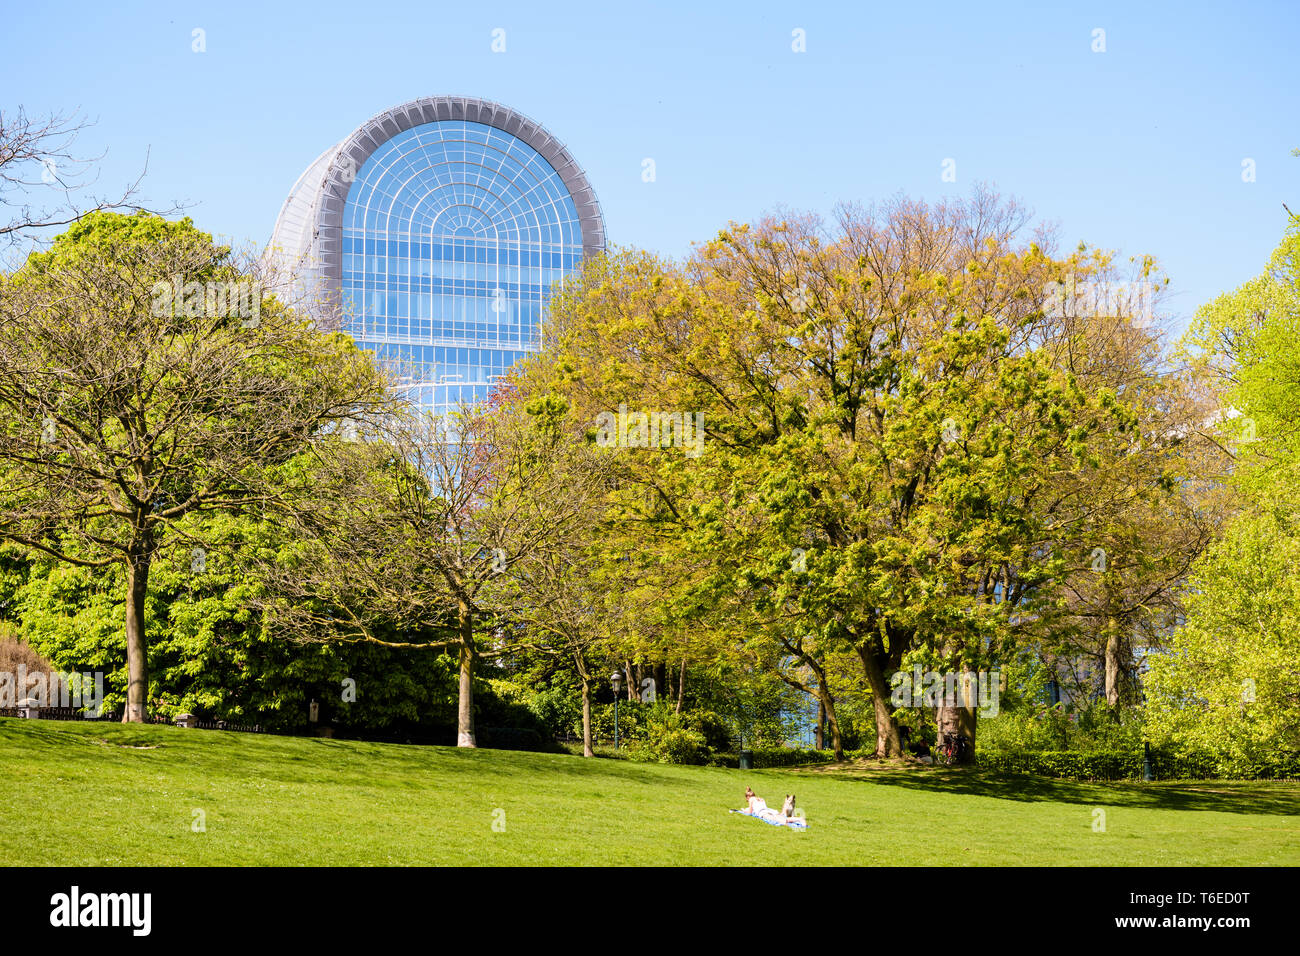 The glass roof of the Paul-Henri Spaak building, seat of the European Parliament in Brussels, sticking out above the trees of the Leopold park. Stock Photo